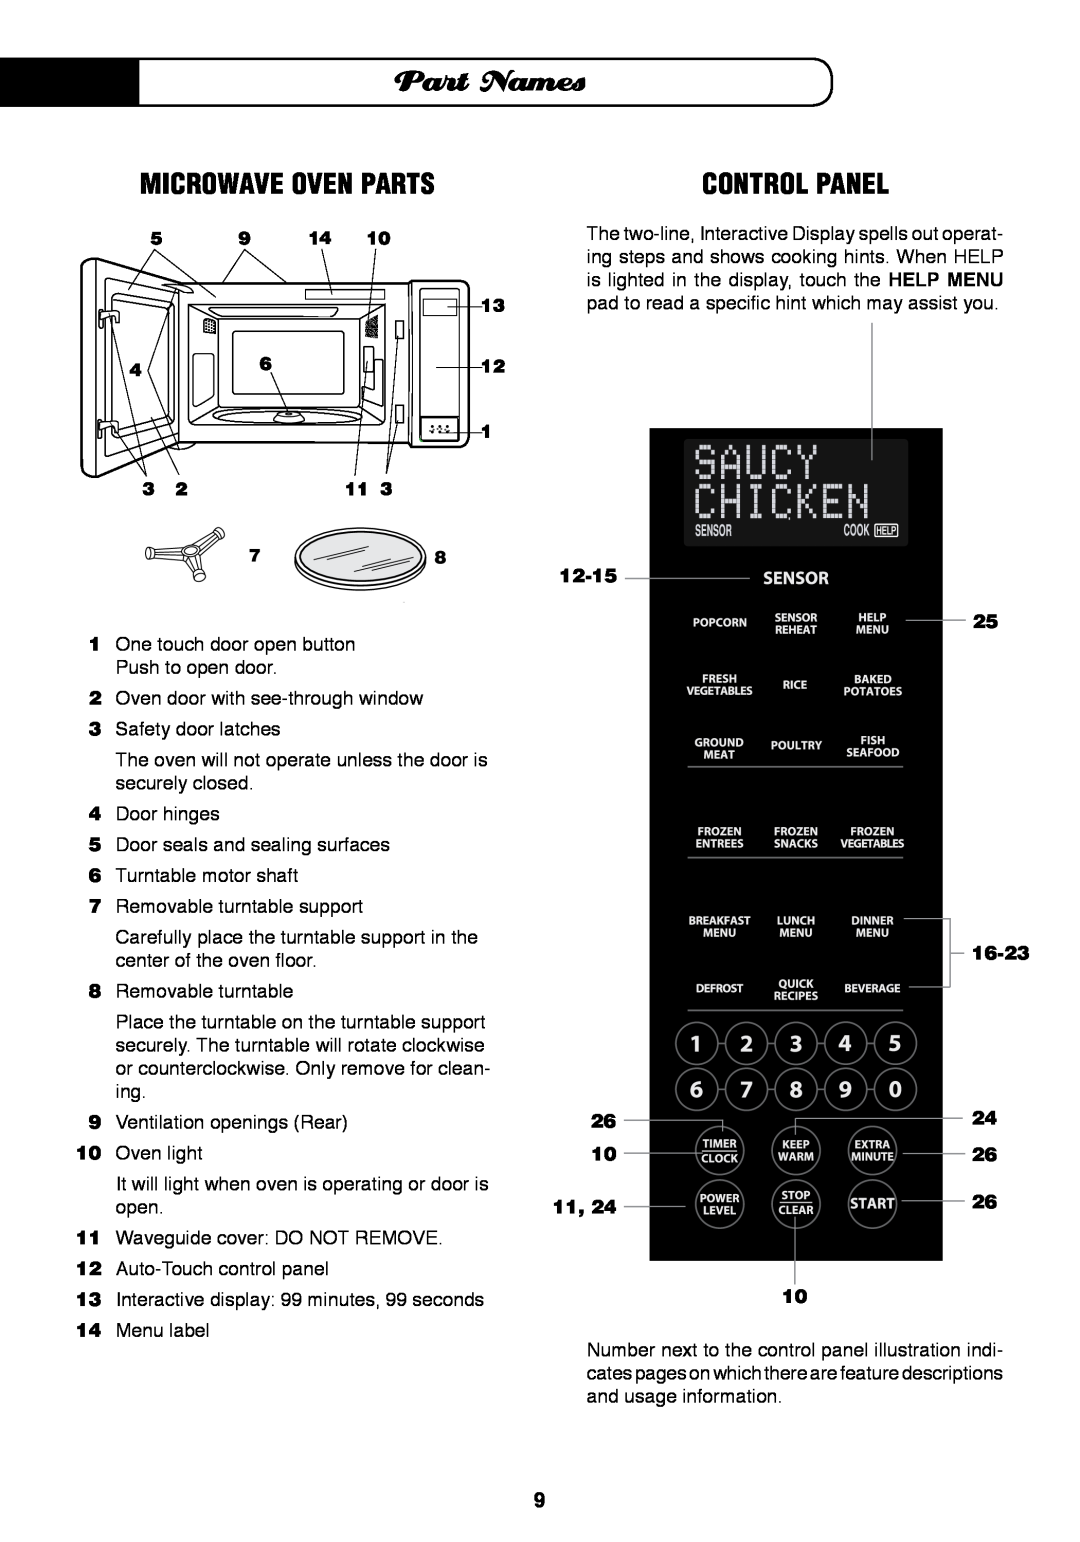 Fisher & Paykel MO-24SS installation instructions Part Names, Microwave Oven Parts, Control Panel 